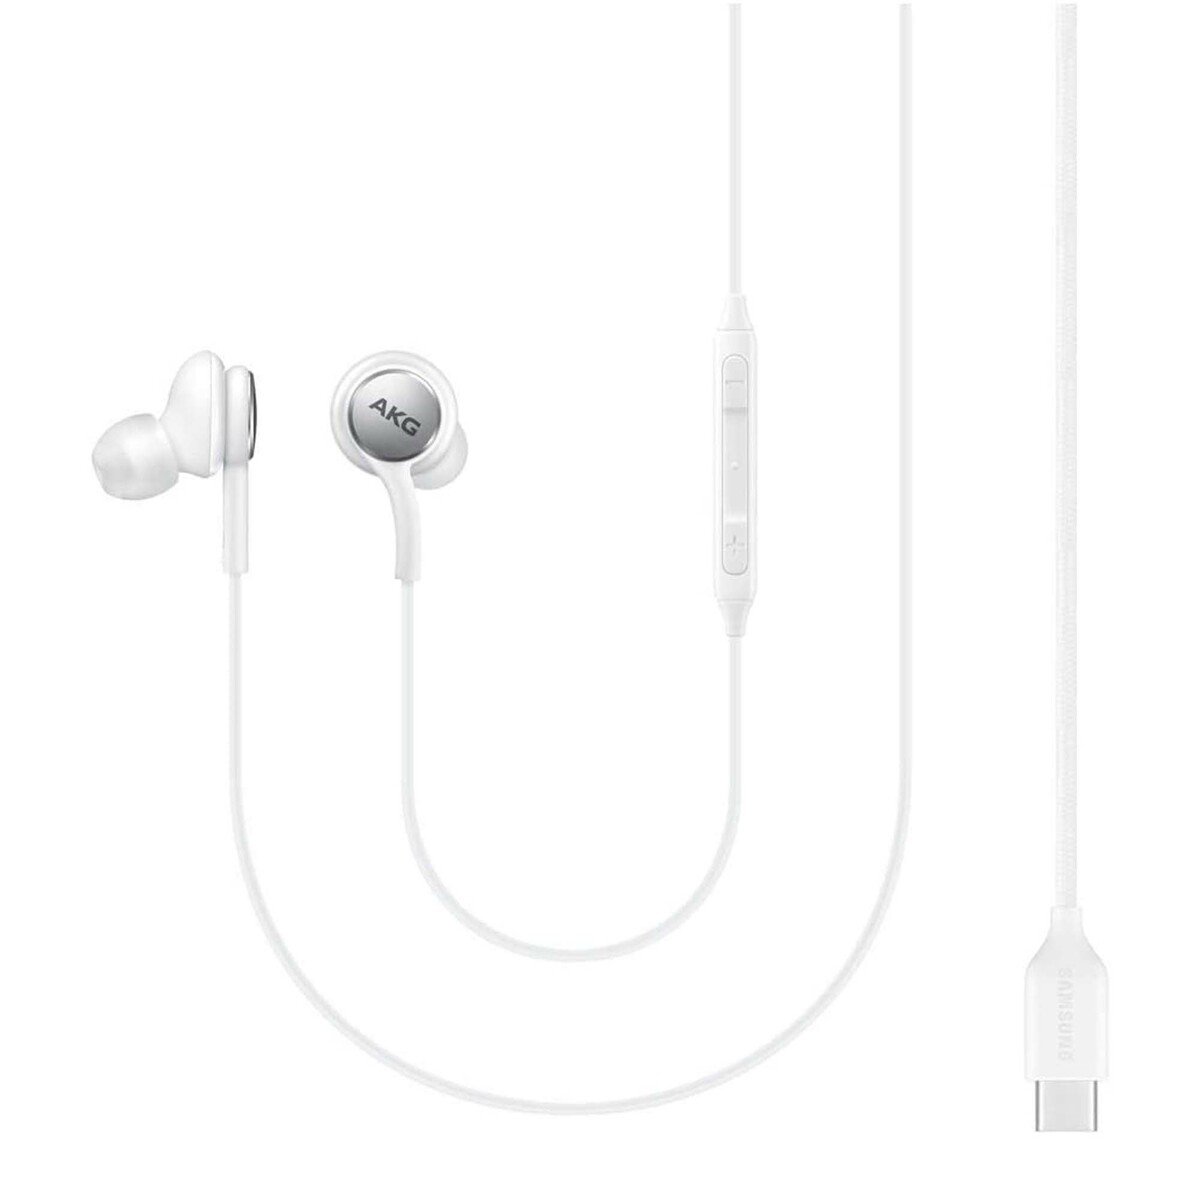 Earphones | Type-C Online Hands Lulu at Mobile EO-IC100 Free Price In-Ear Best | Samsung Kuwait (White) Stereo